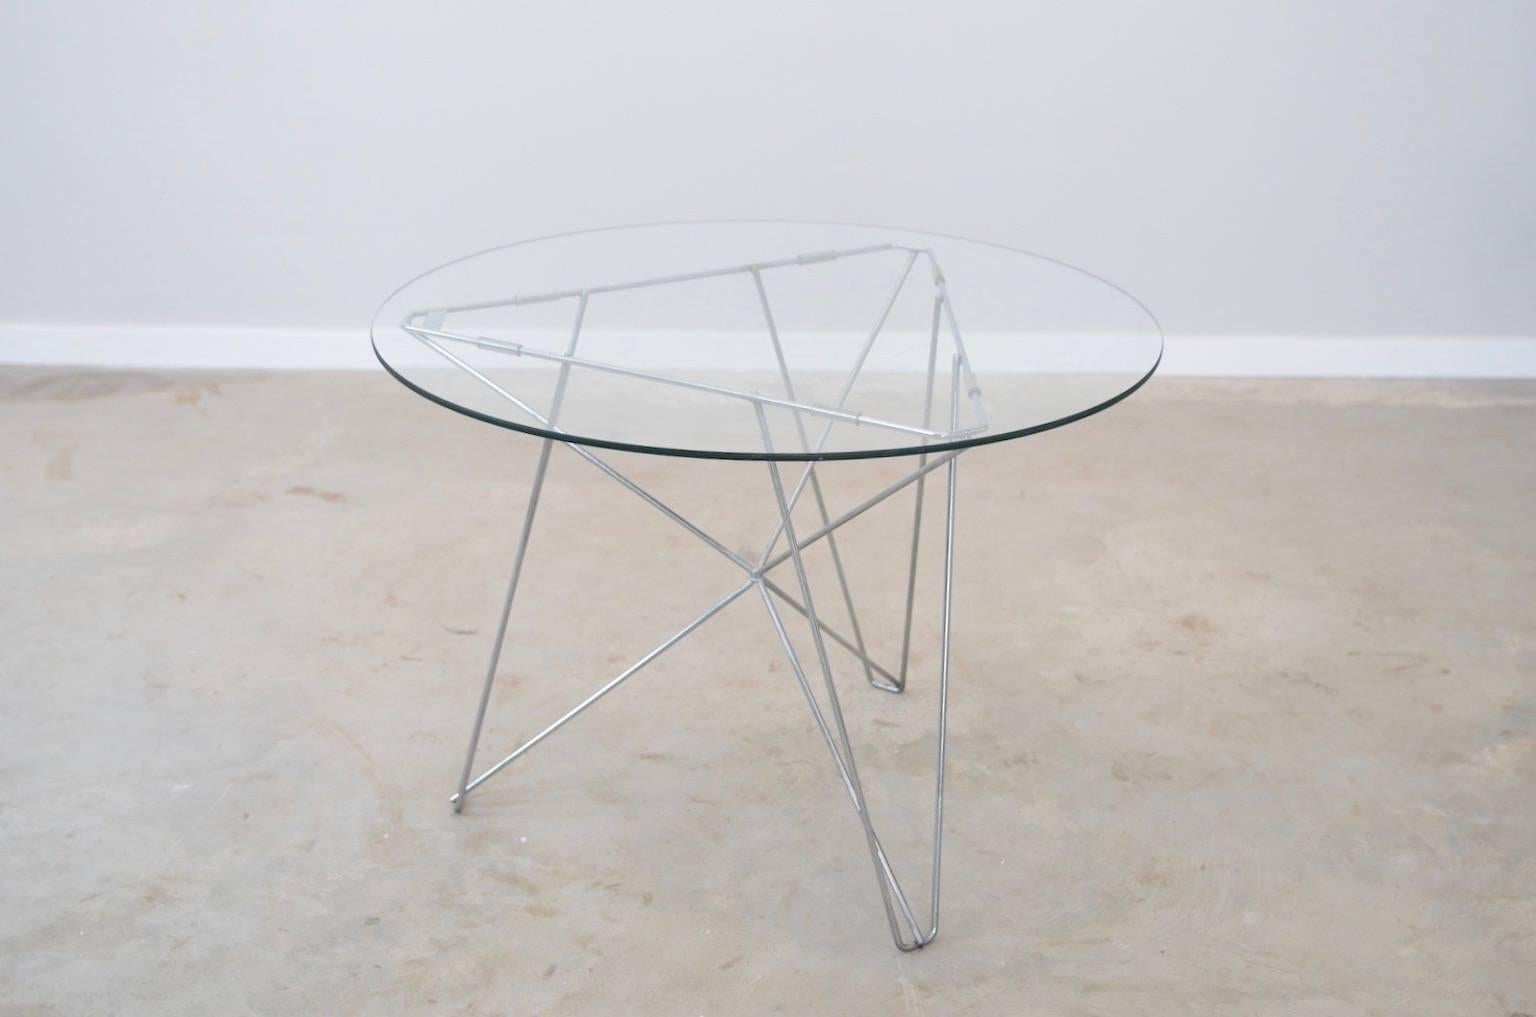 On invitation of Martin Visser (then head of the design department of 't Spectrum) the artist and Cobra co-founder Constant designed the IJhorst table in 1953. The table was manufactured by 't Spectrum in limited numbers. In 1986 his partner Adele